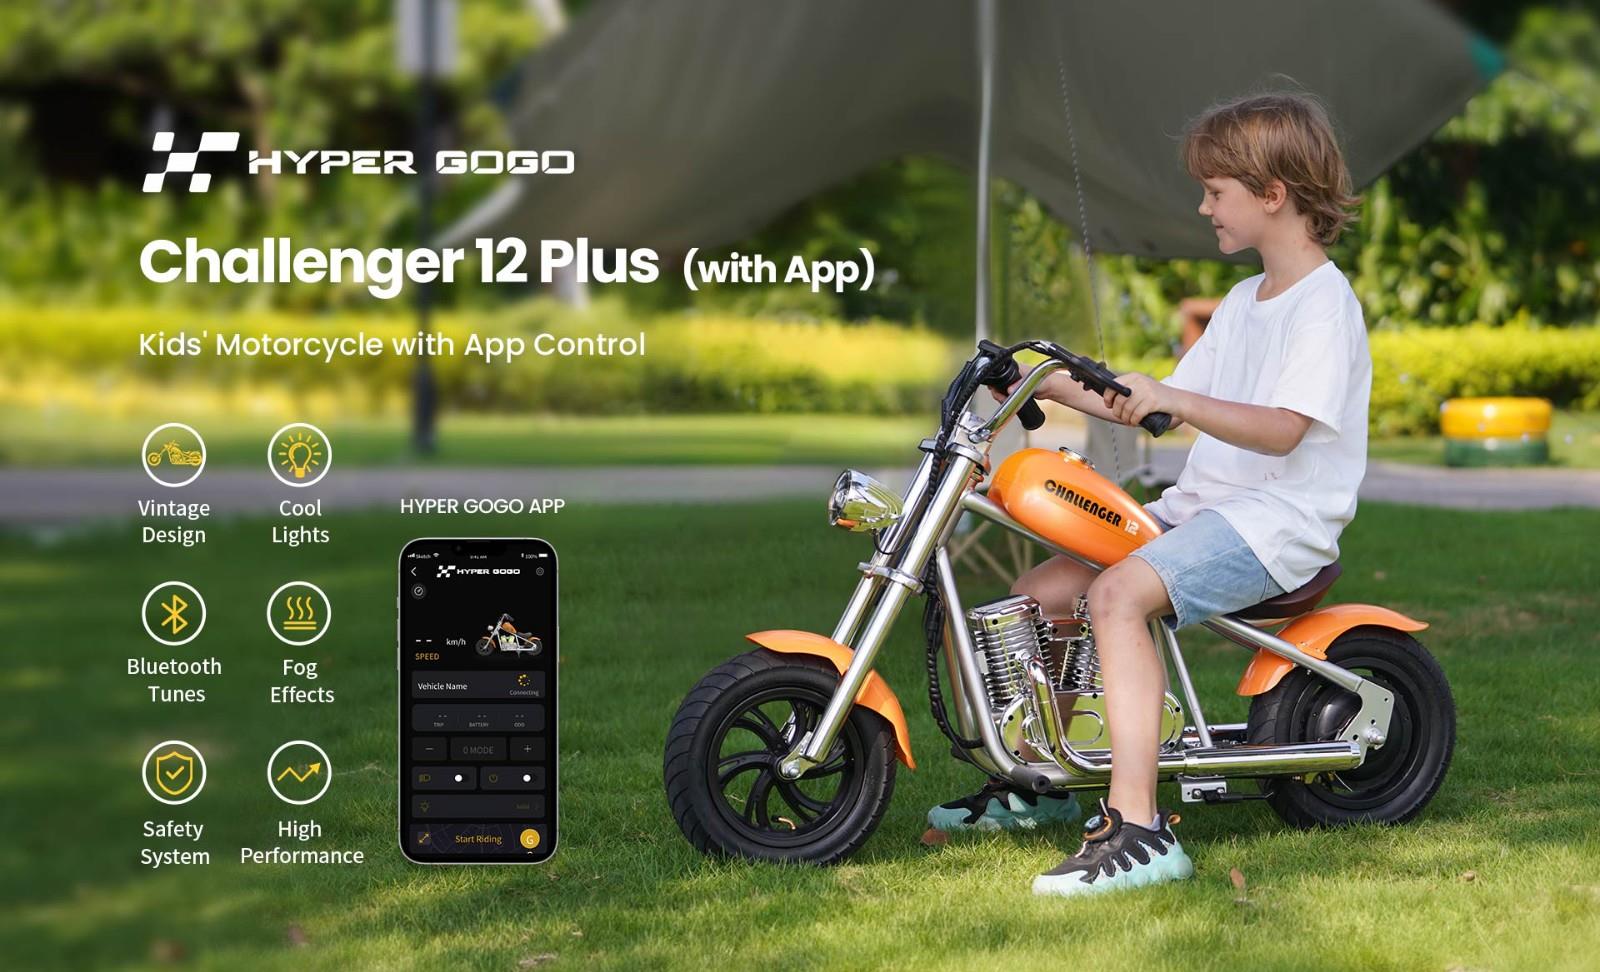 Hyper GOGO Challenger 12 Plus Electric Motorcycle with App for Kids, 12 x 3 Tires, 160W, 5.2Ah, Bluetooth Speaker - Green